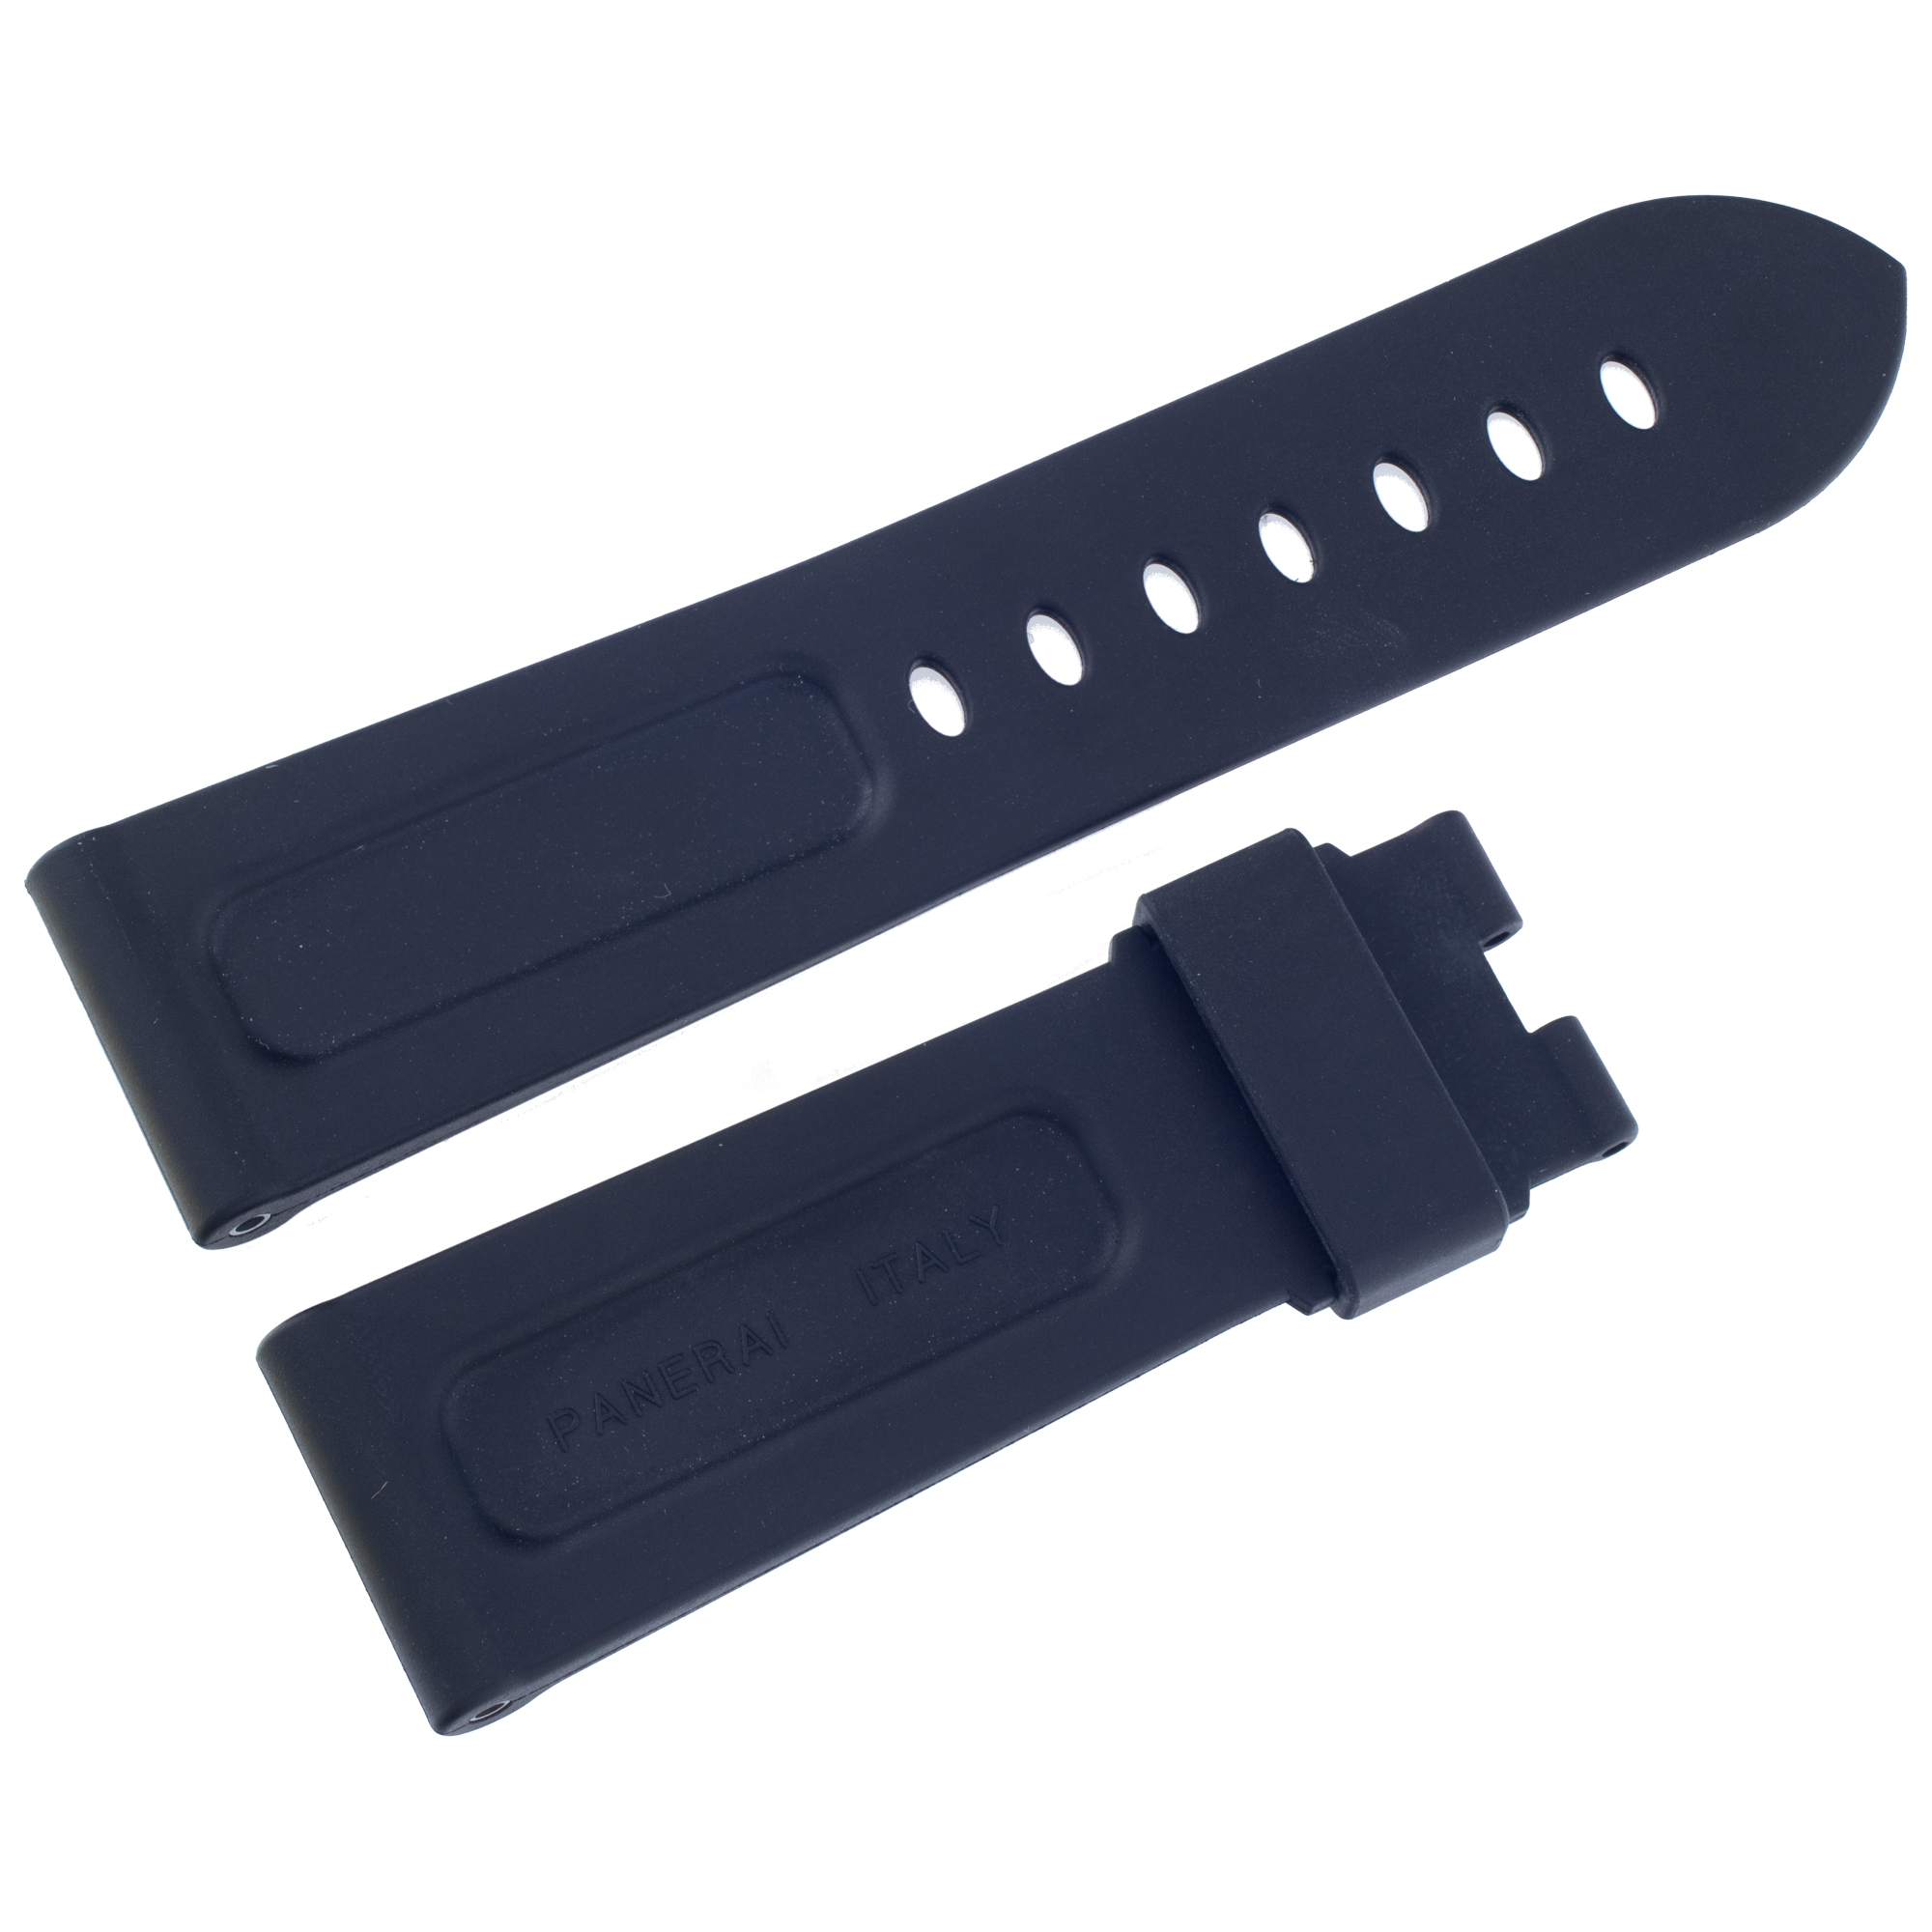 Panerai black rubber watch band (24 x 21). 24mm width by the lug end and 21 mm width by the buckle end. Length: 4.1/2" long piece and 2.75" short piece. image 1